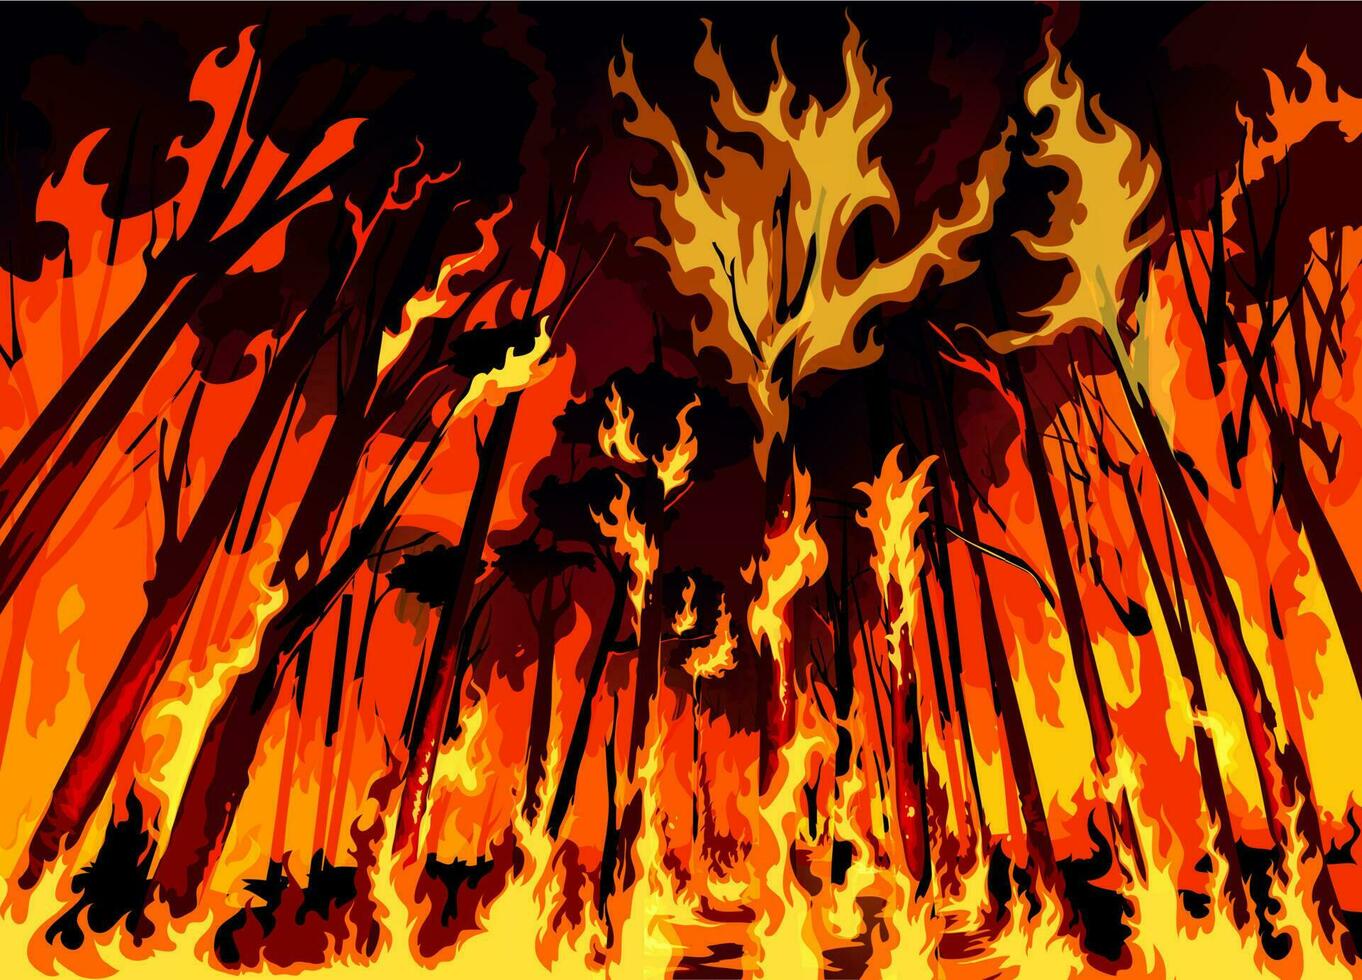 Forest fire wildfire disaster with burning trees vector